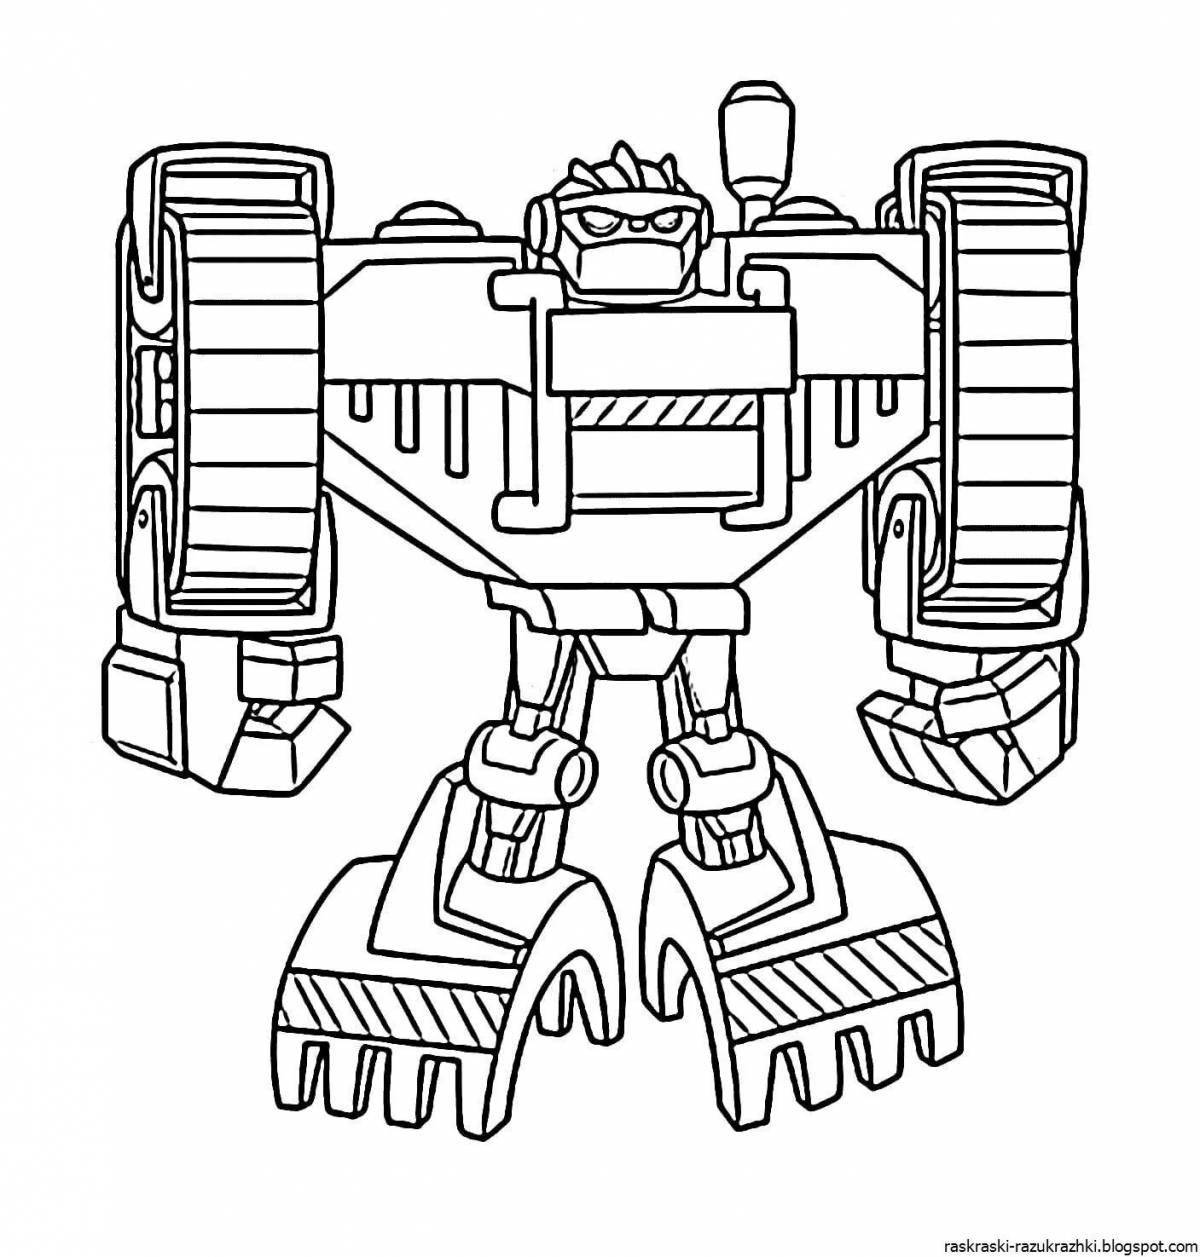 Adorable robot coloring book for kids